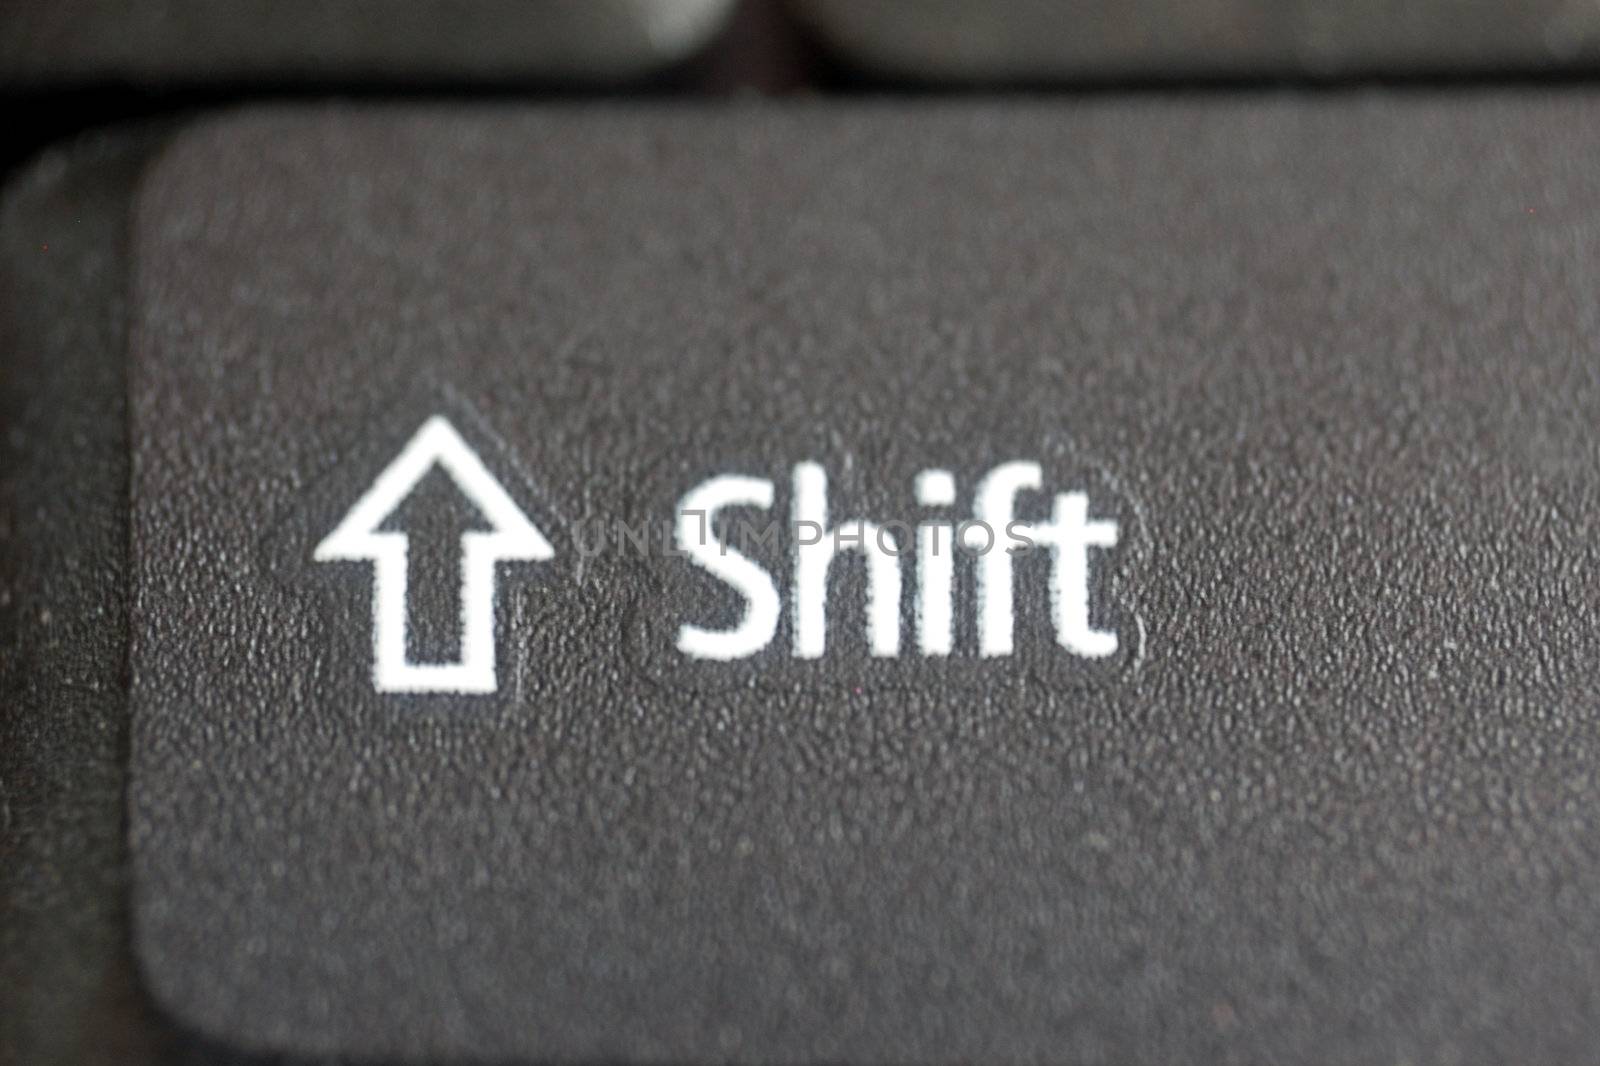 Shift button by mettus